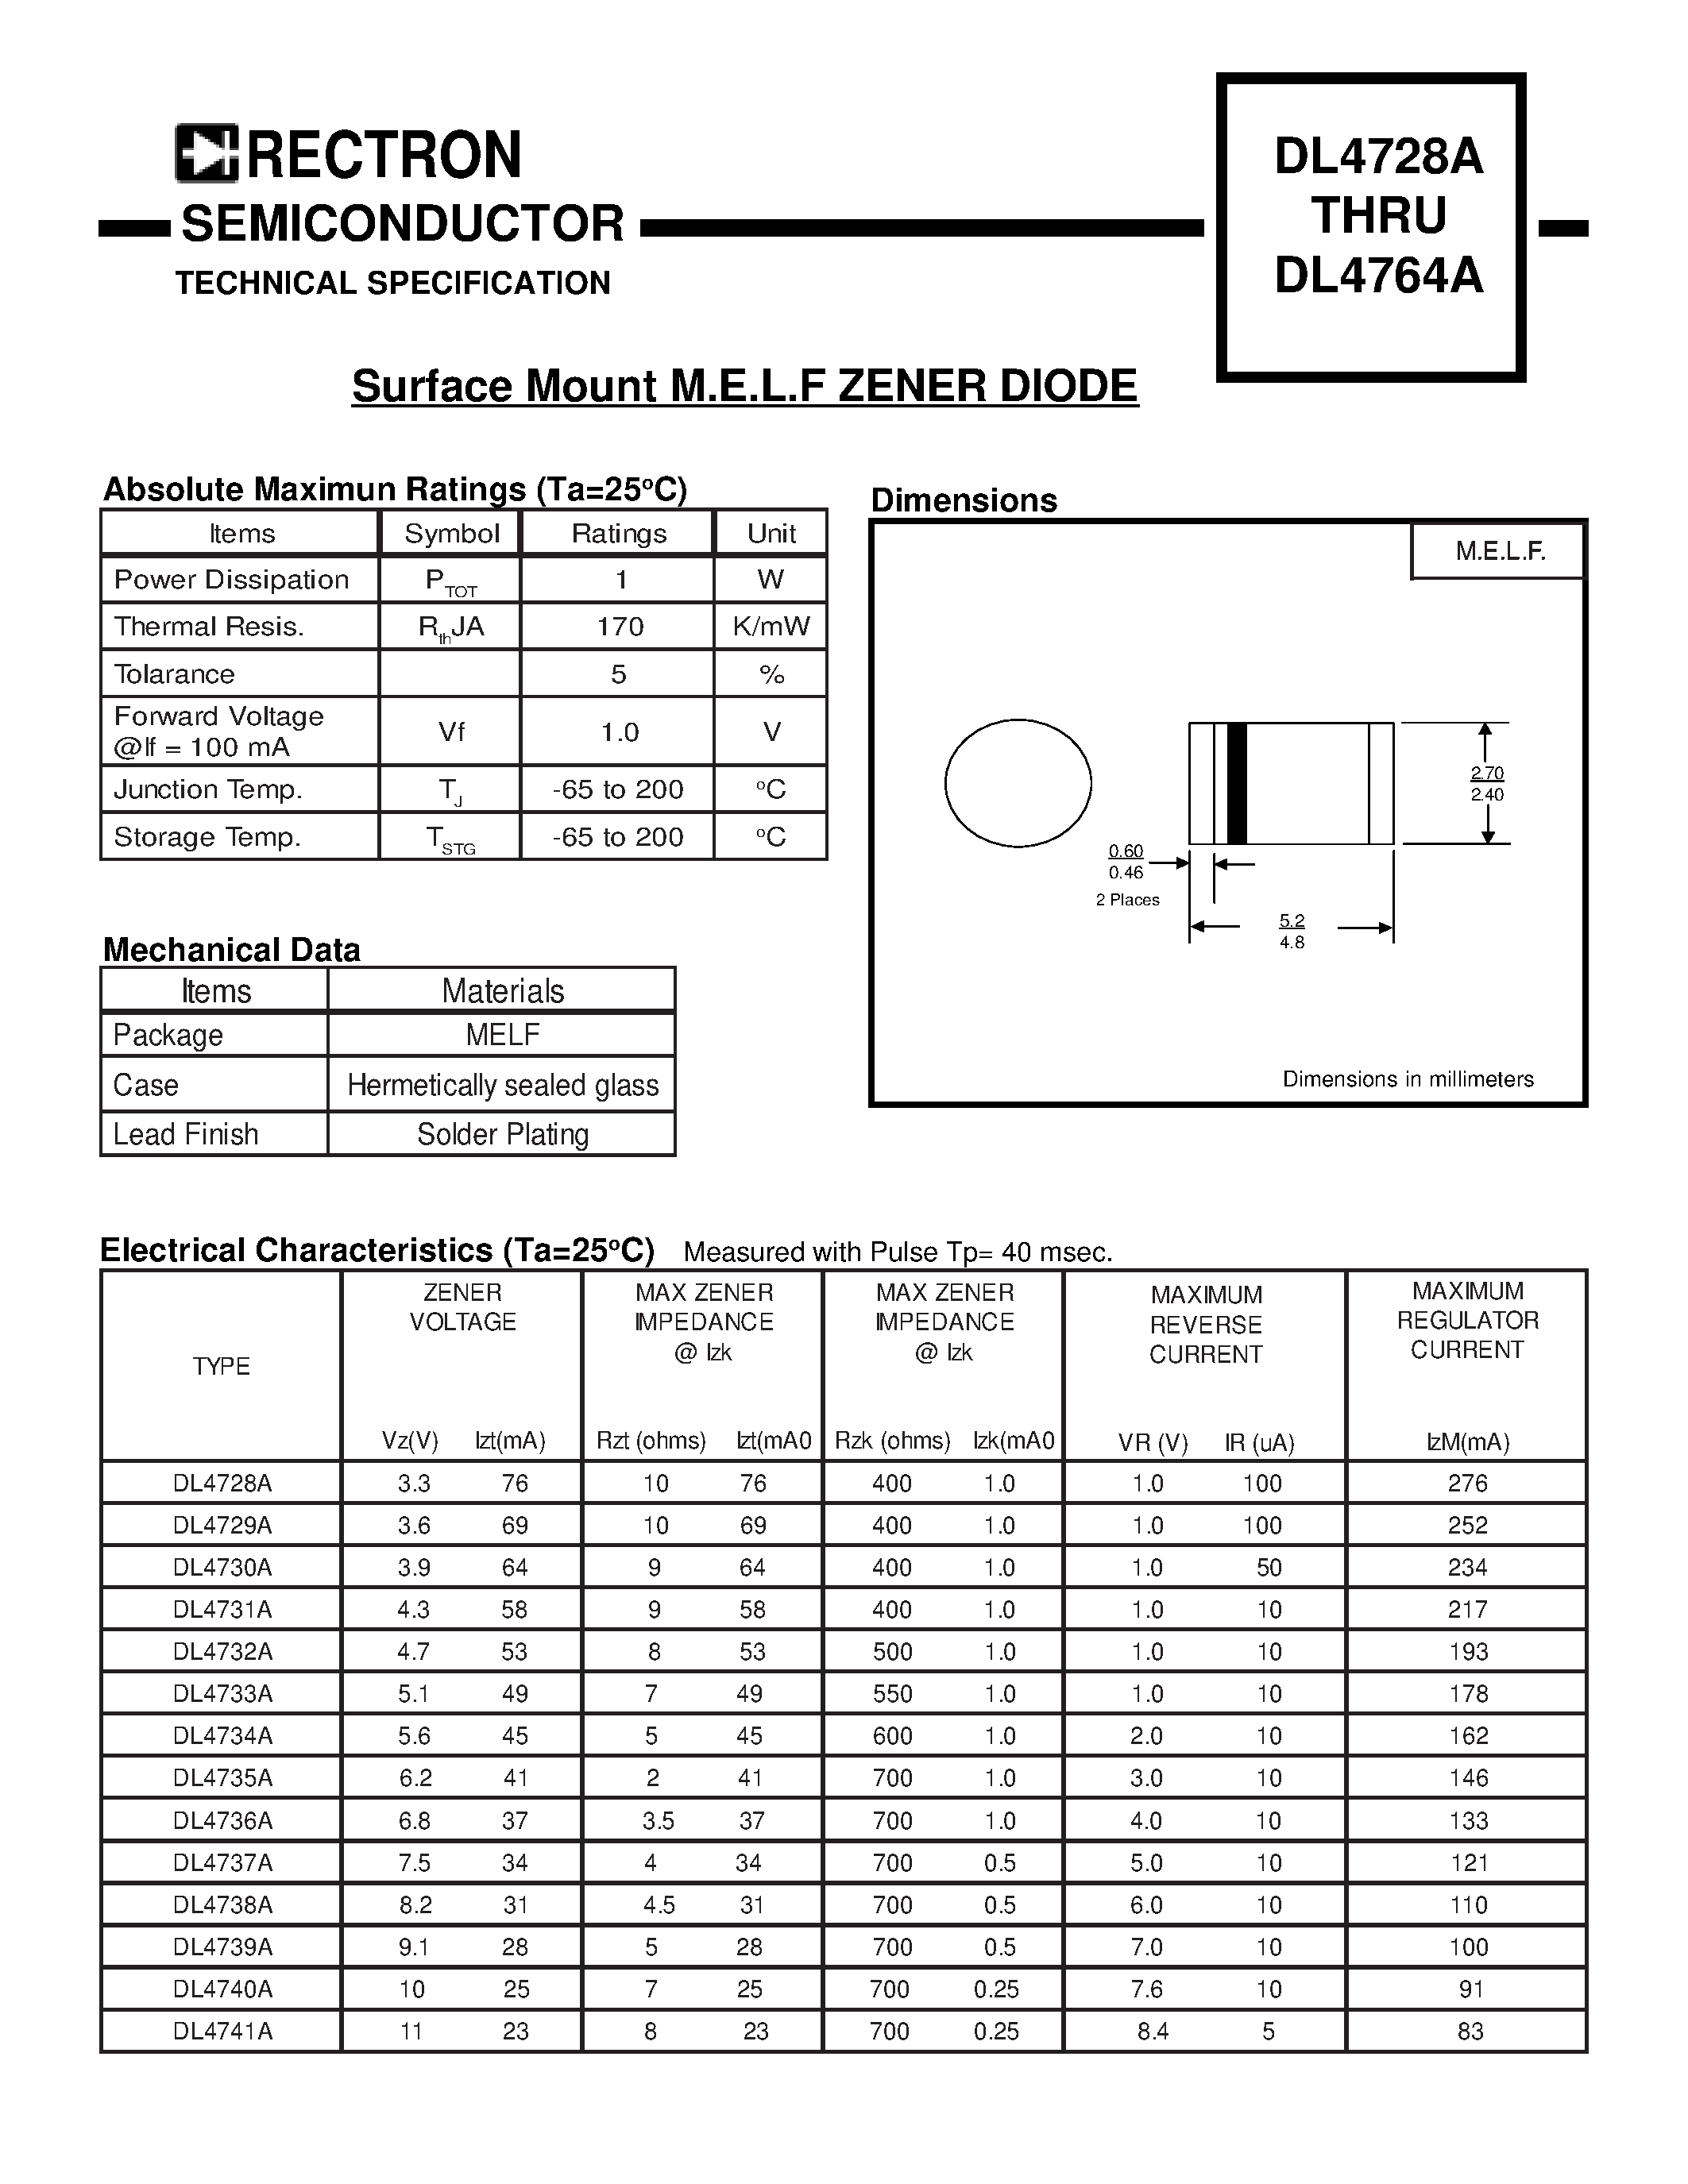 Datasheet DL4734A - Surface Mount M.E.L.F ZENER DIODE page 1